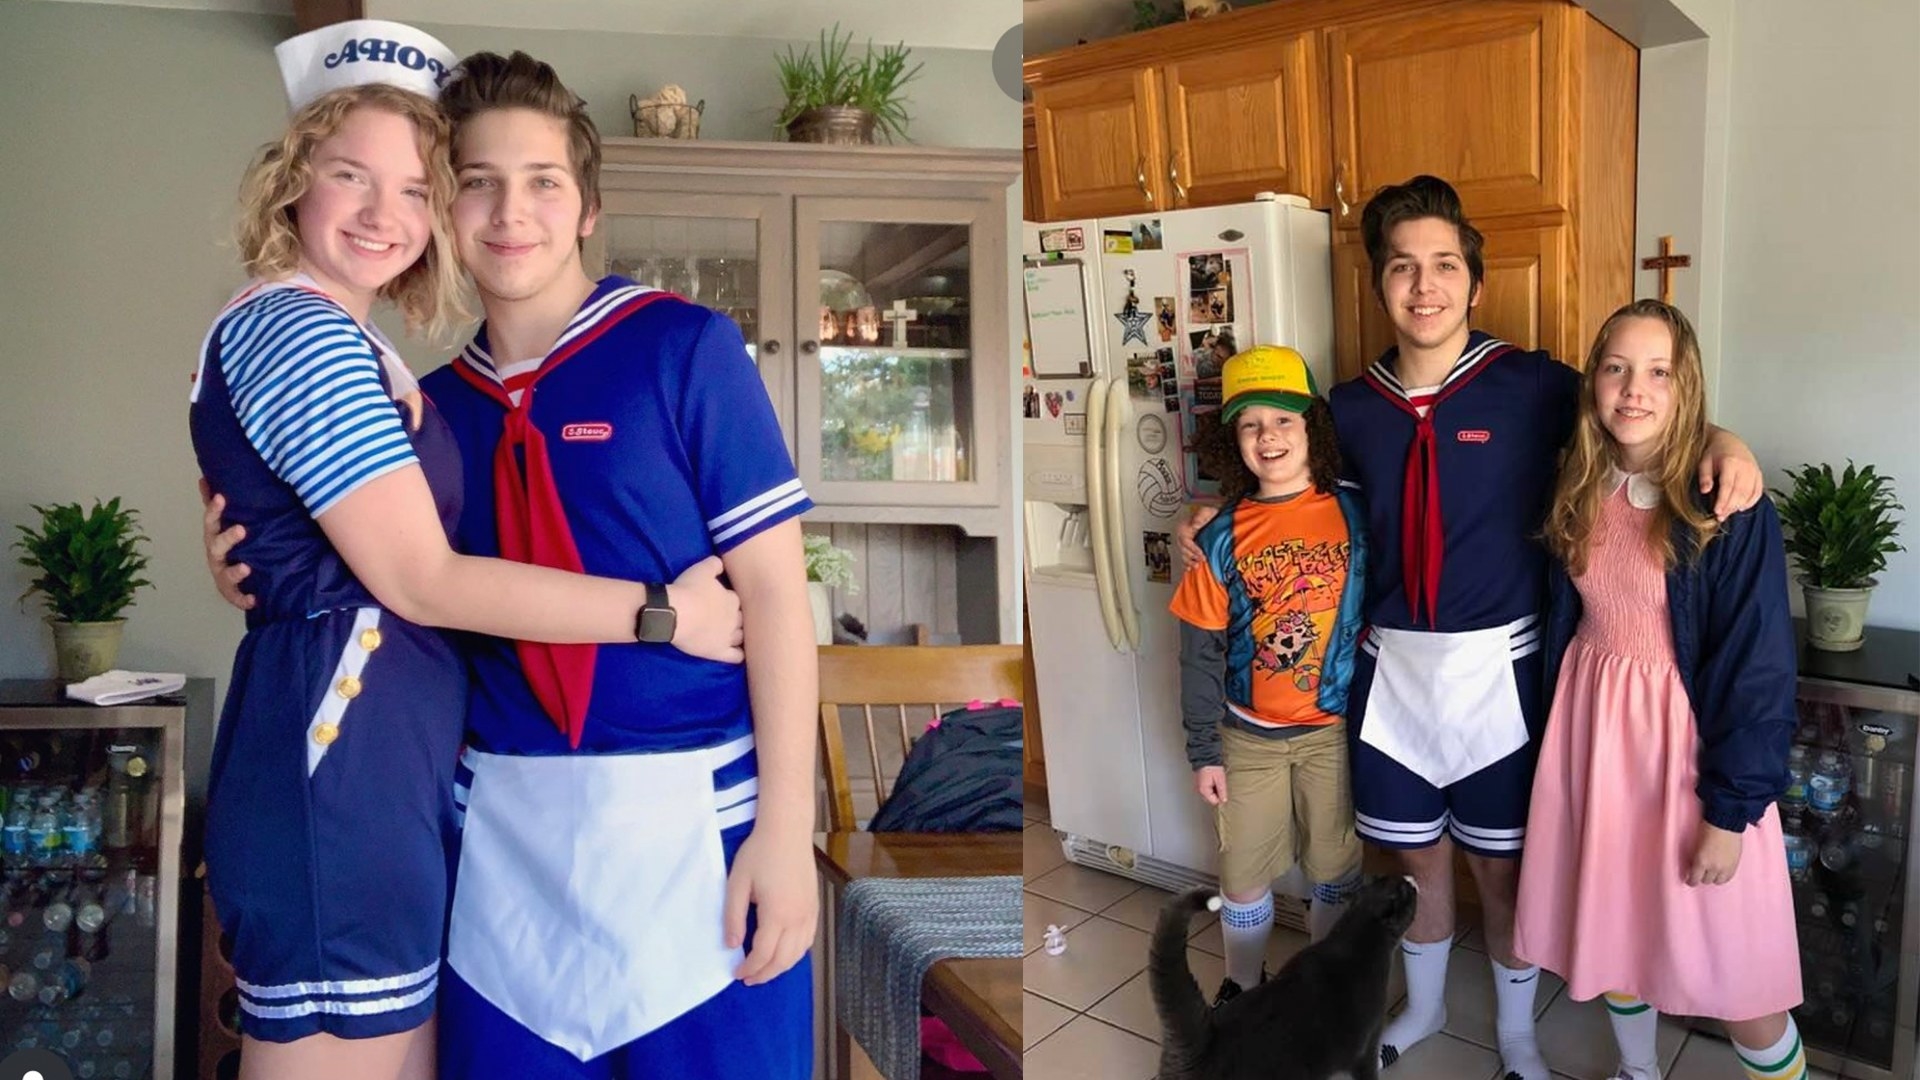 Me as Steve from Stranger Things with my girlfriend (Robin), sister (Eleven), and Quinn (Dustin).